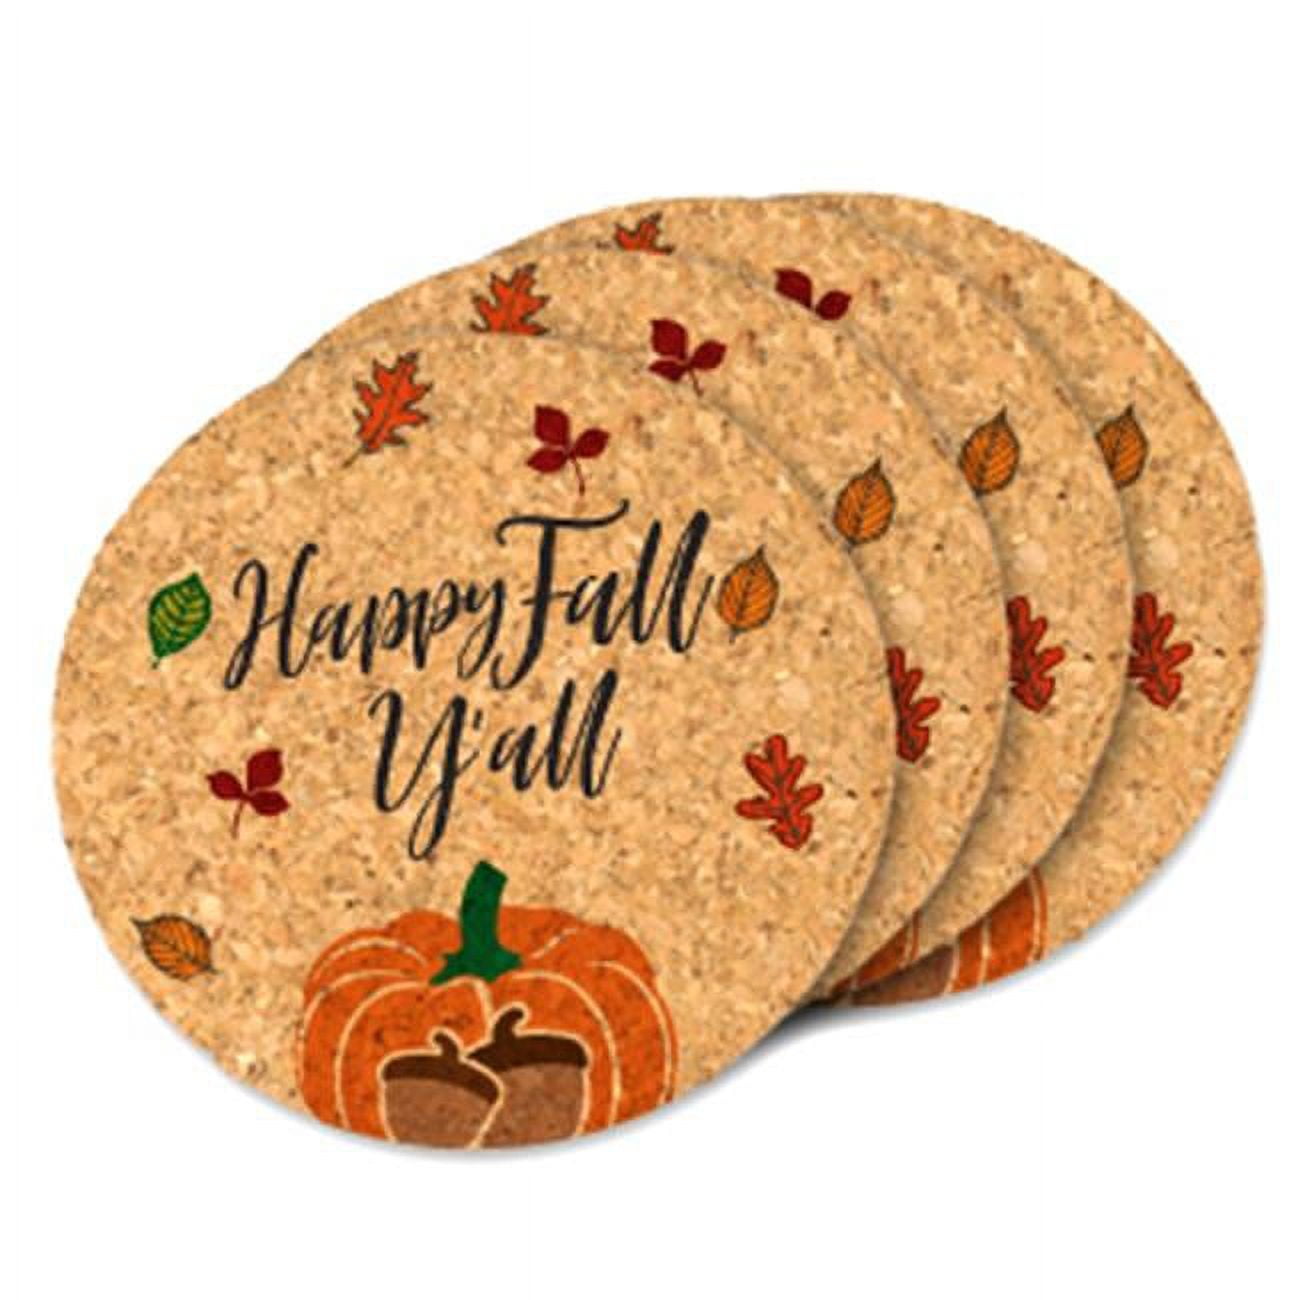 8417235 4 In. Dia. Happy Fall You All Round Cork Coasters - Set Of 4